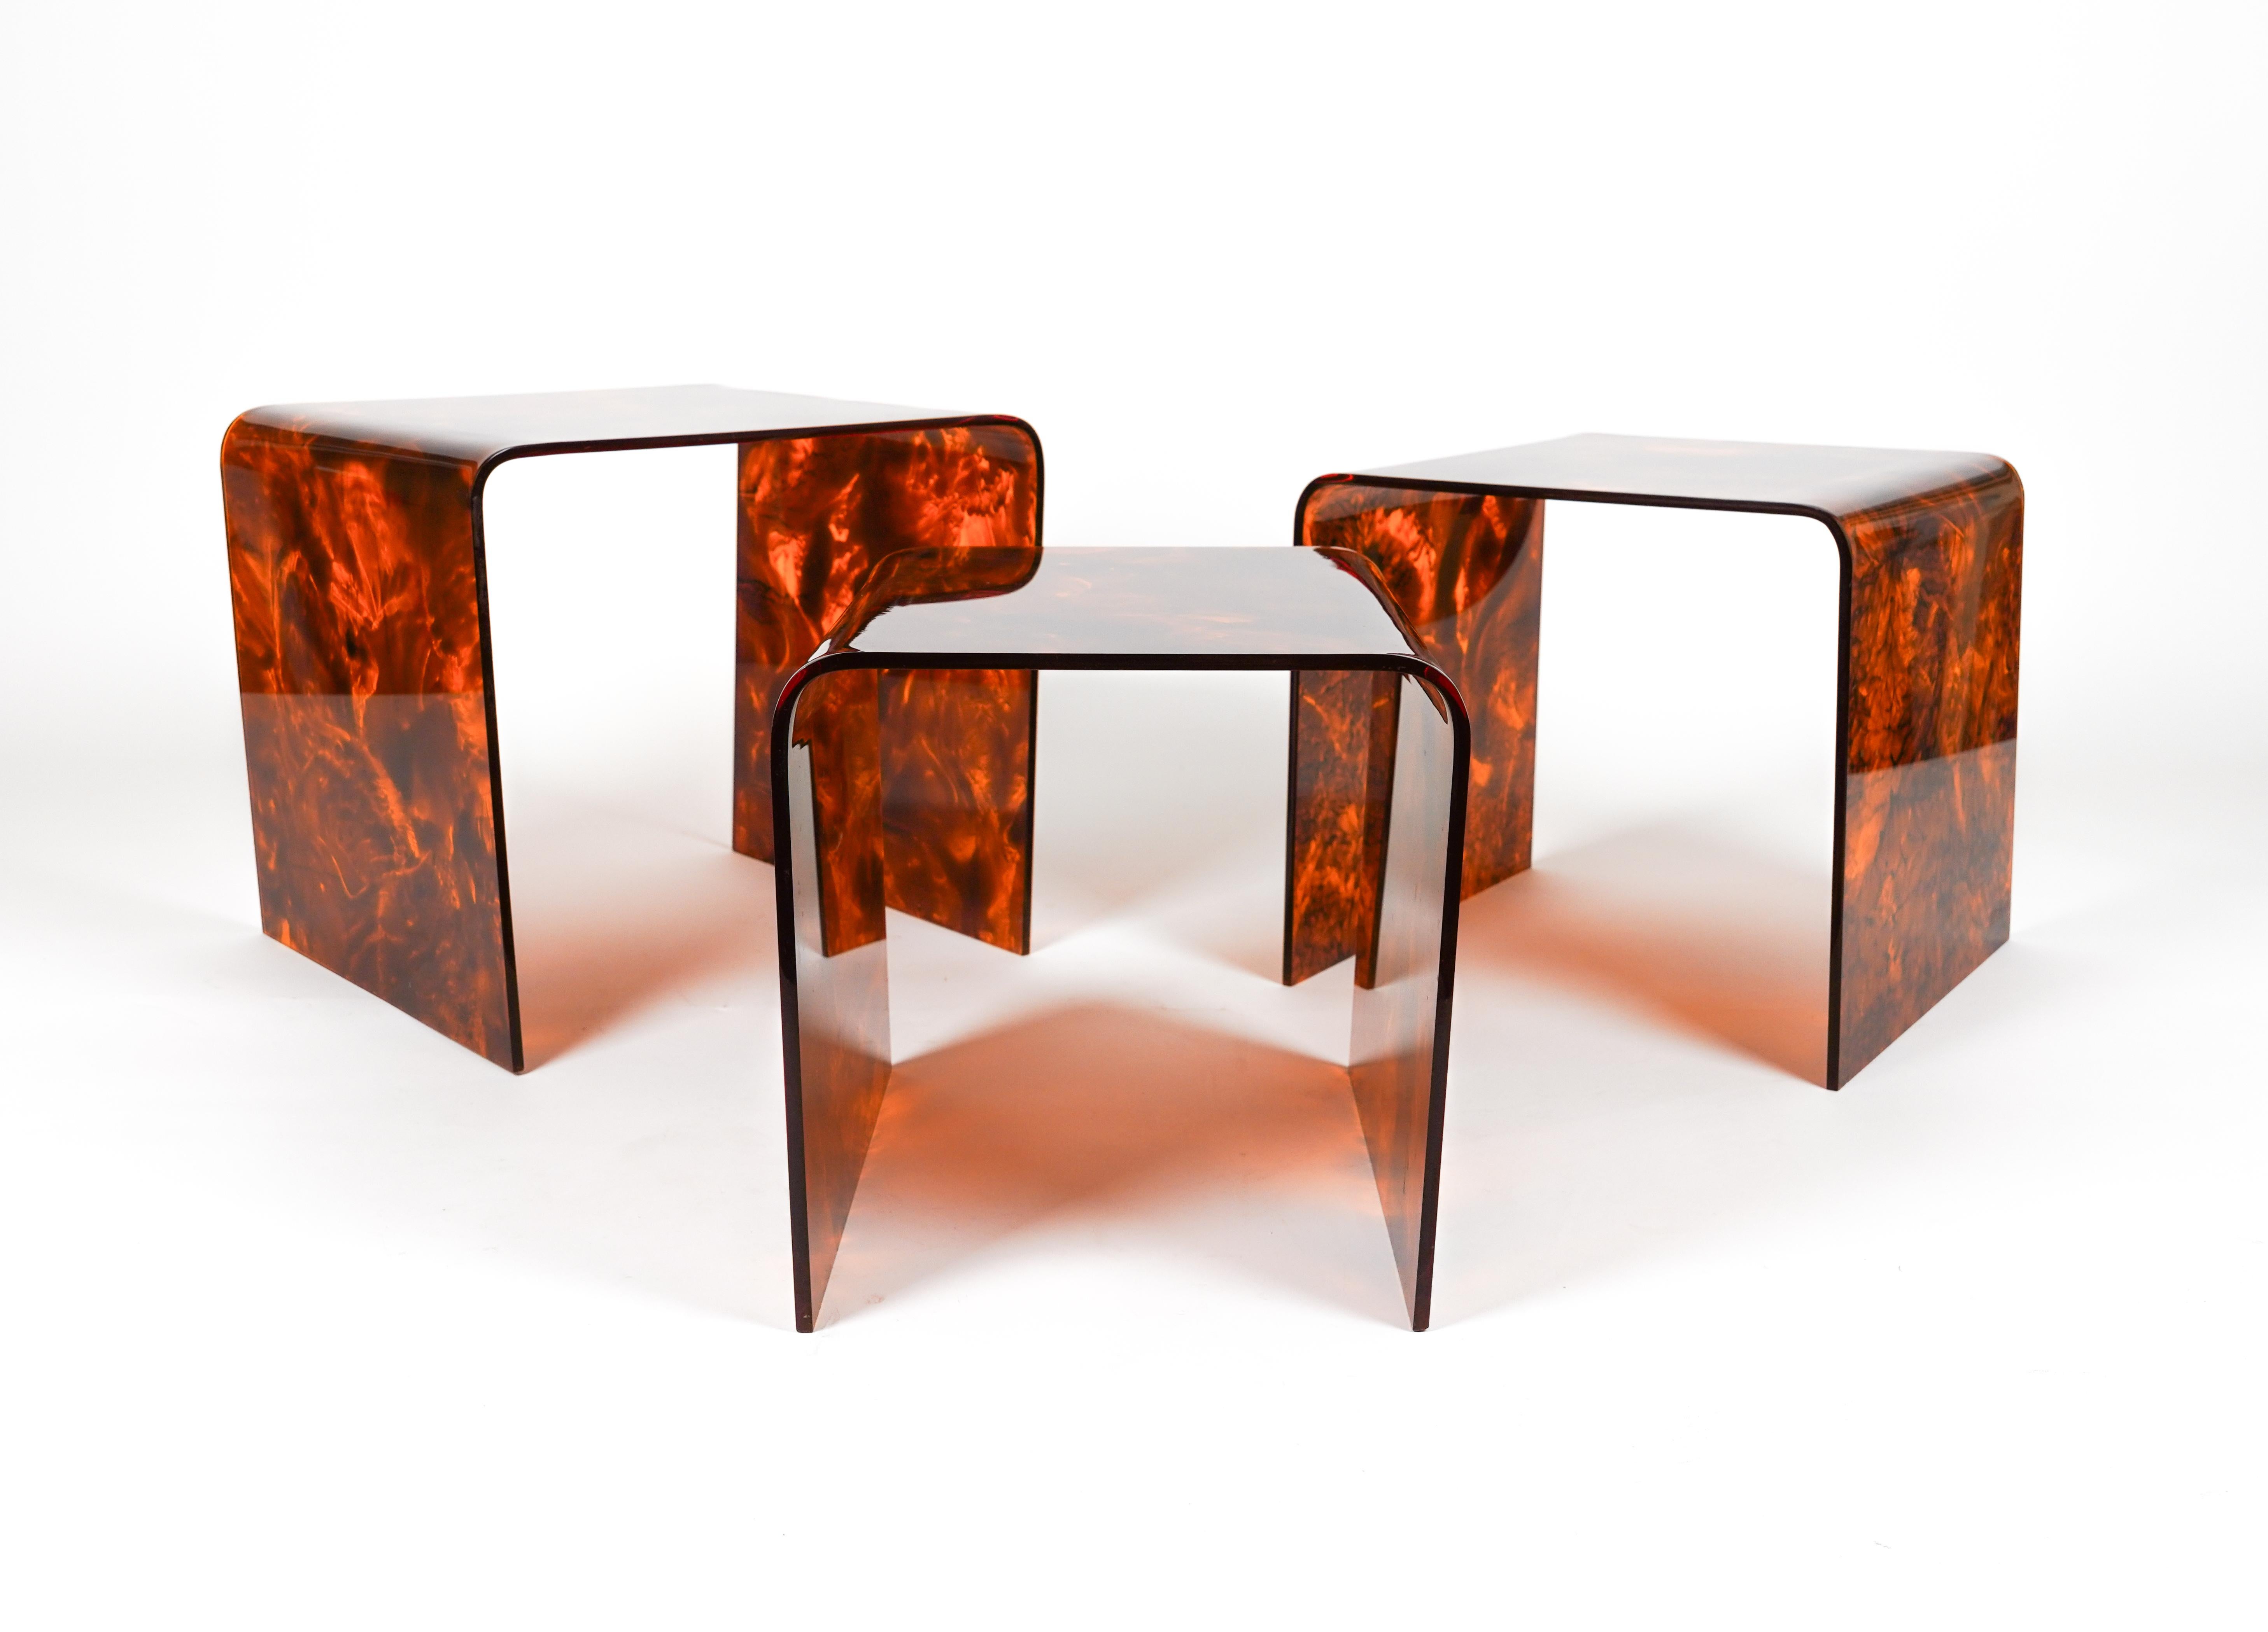 Late 20th Century Set of 3 Nesting Tables in Lucite Faux Tortoiseshell Christian Dior, Italy 1970s For Sale